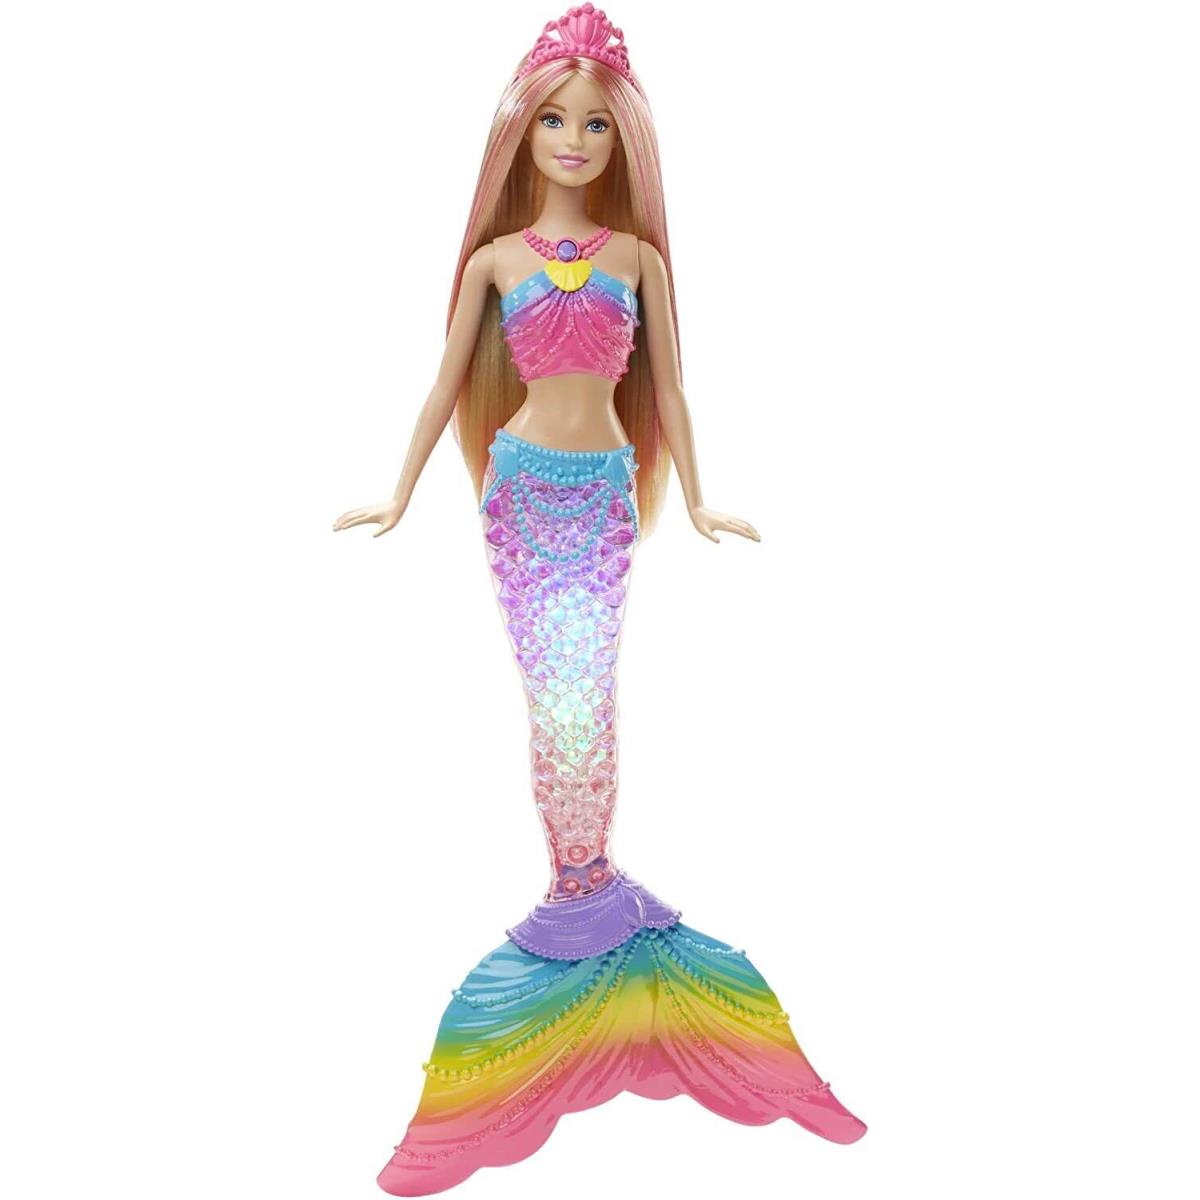 Mermaid Barbie Doll with Light-up Rainbow Tail Colorful Look with Tiara Barbie